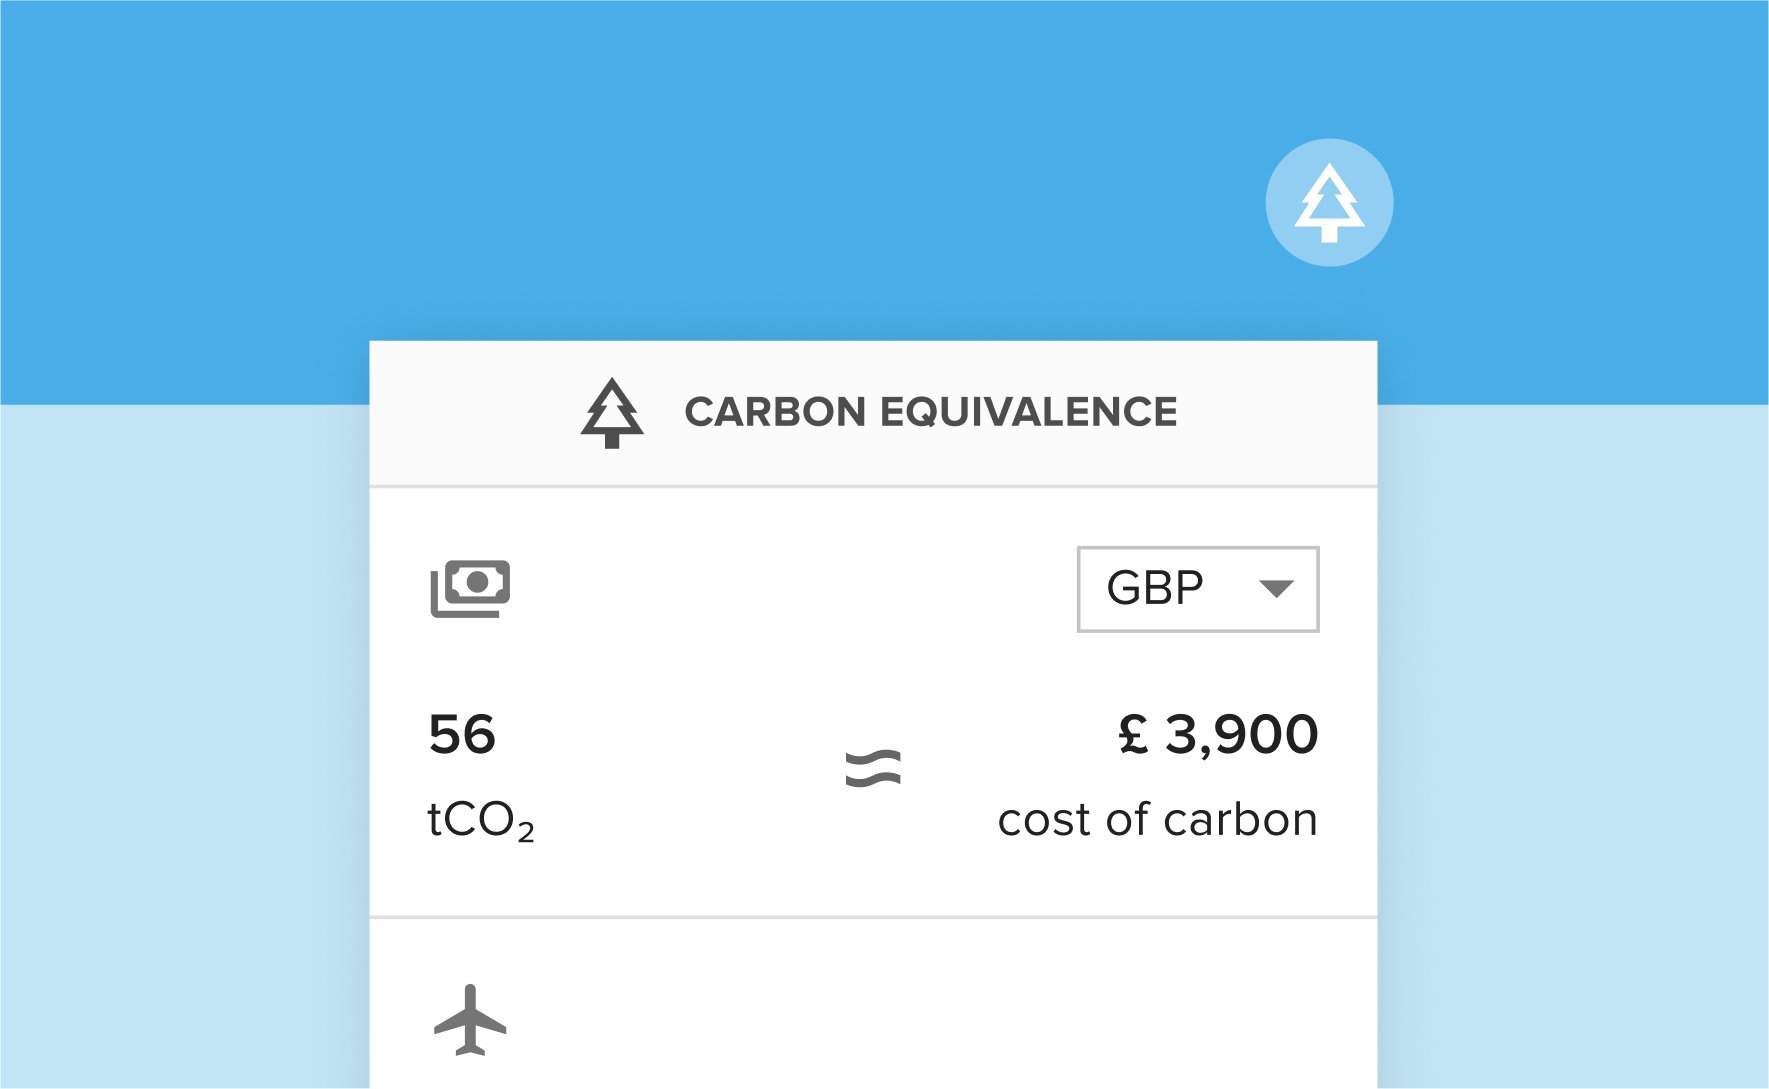 Carbon equivalence in euros of 56 tCO²